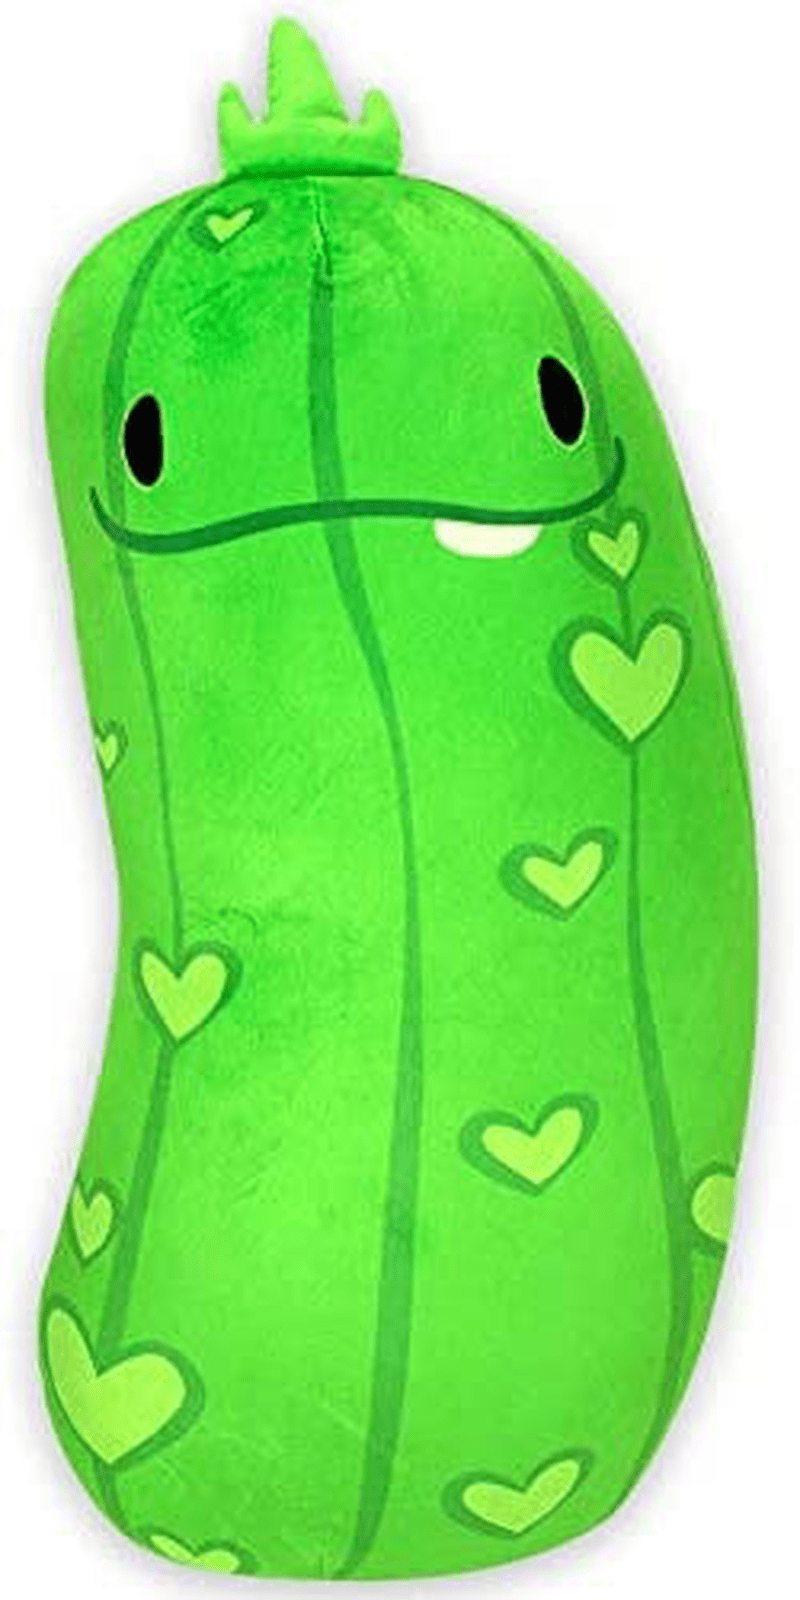 Cats vs Pickles - Hugger - Big Dill - 20" Super Soft and Squishy Stuffed Plush - Great Toys for Boys and Girls Age 4-7. Use to Create Fun Room Décor, as Calm Down Toys or Sensory Toys. Home & Garden > Decor > Seasonal & Holiday Decorations Cats vs Pickles Big Dill  